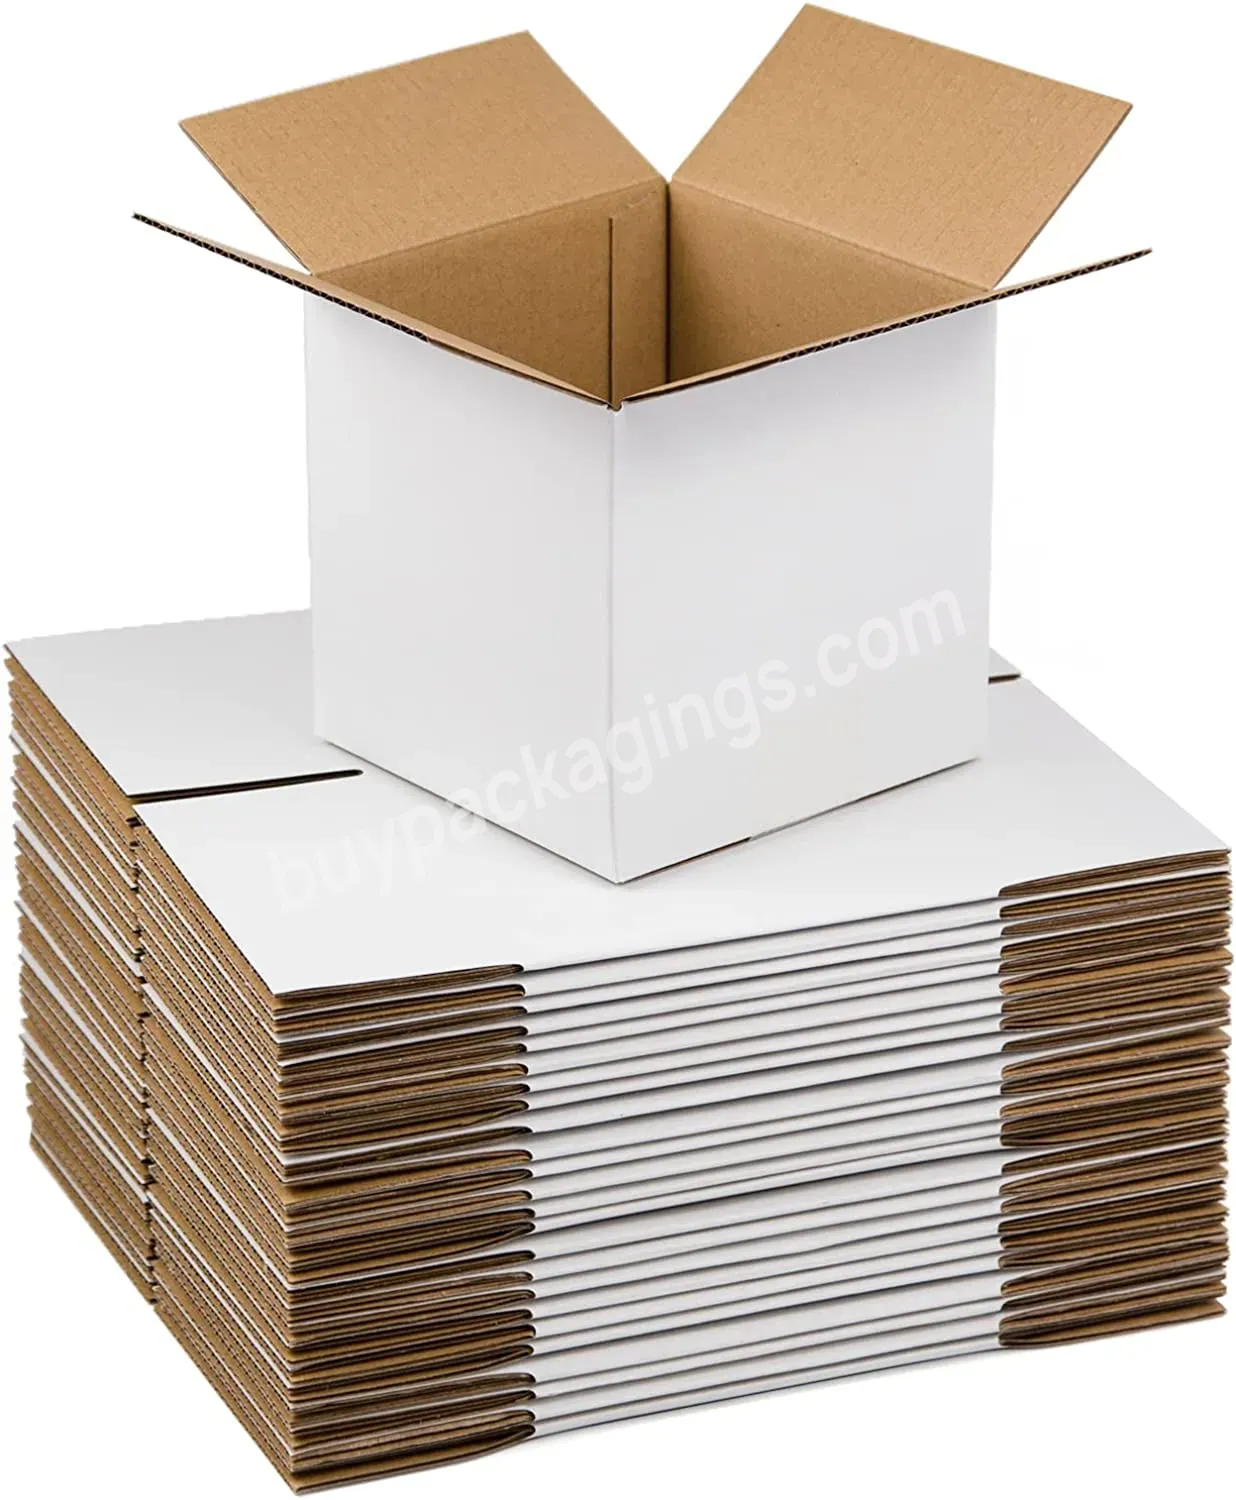 Custom Logo Shipping Mailer Gift Box 6x6x6 Inches Small Corrugated Cardboard Boxes - Buy Tuck Top Box,Coffee Cups Mugs Manufacturer Gift Box Set,Coffee Cup Set Gift Box.